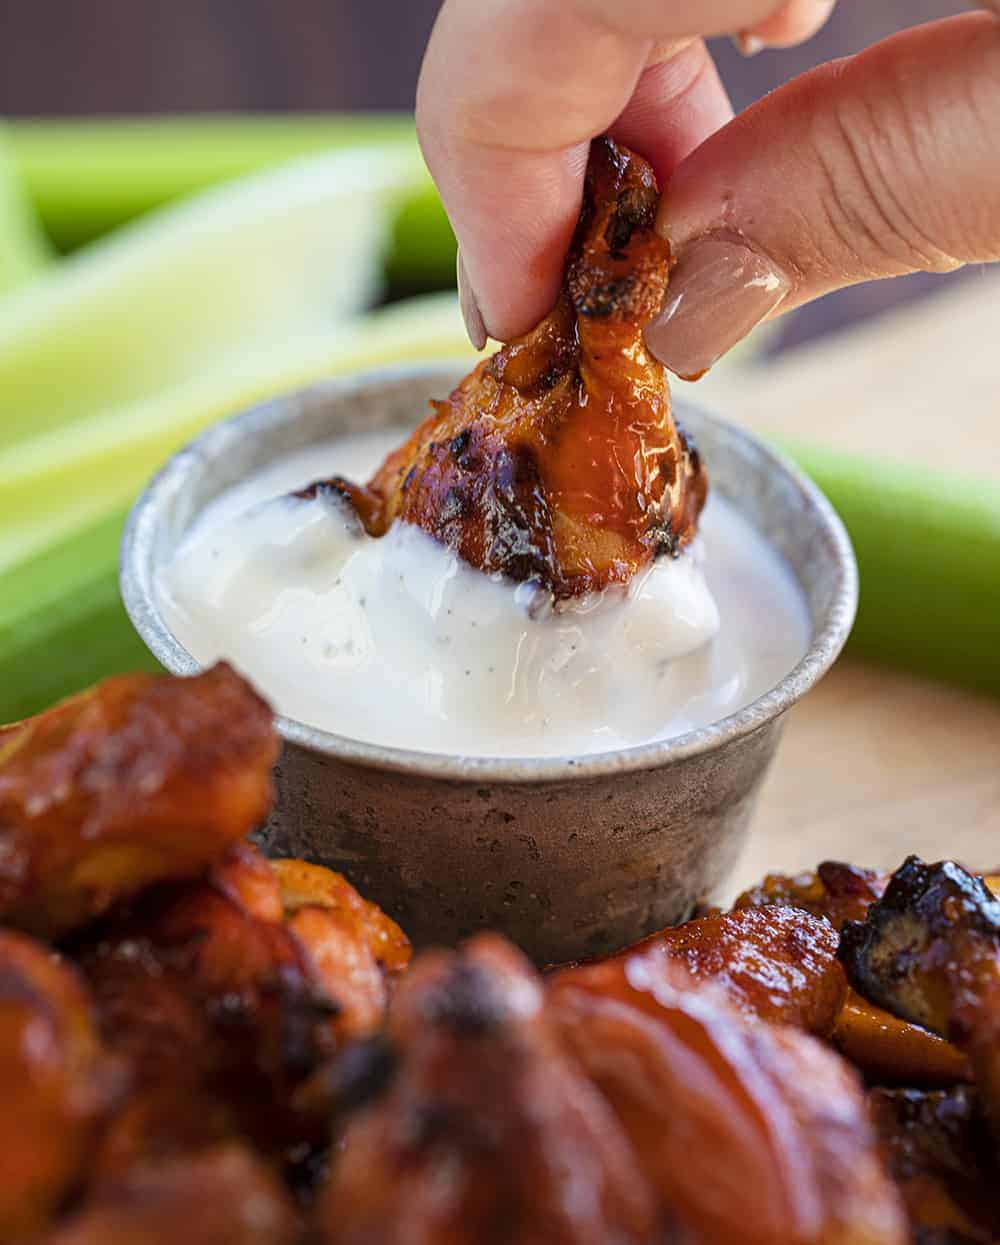 Dipping Buffalo Chicken Wings in Ranch or Bleu Cheese